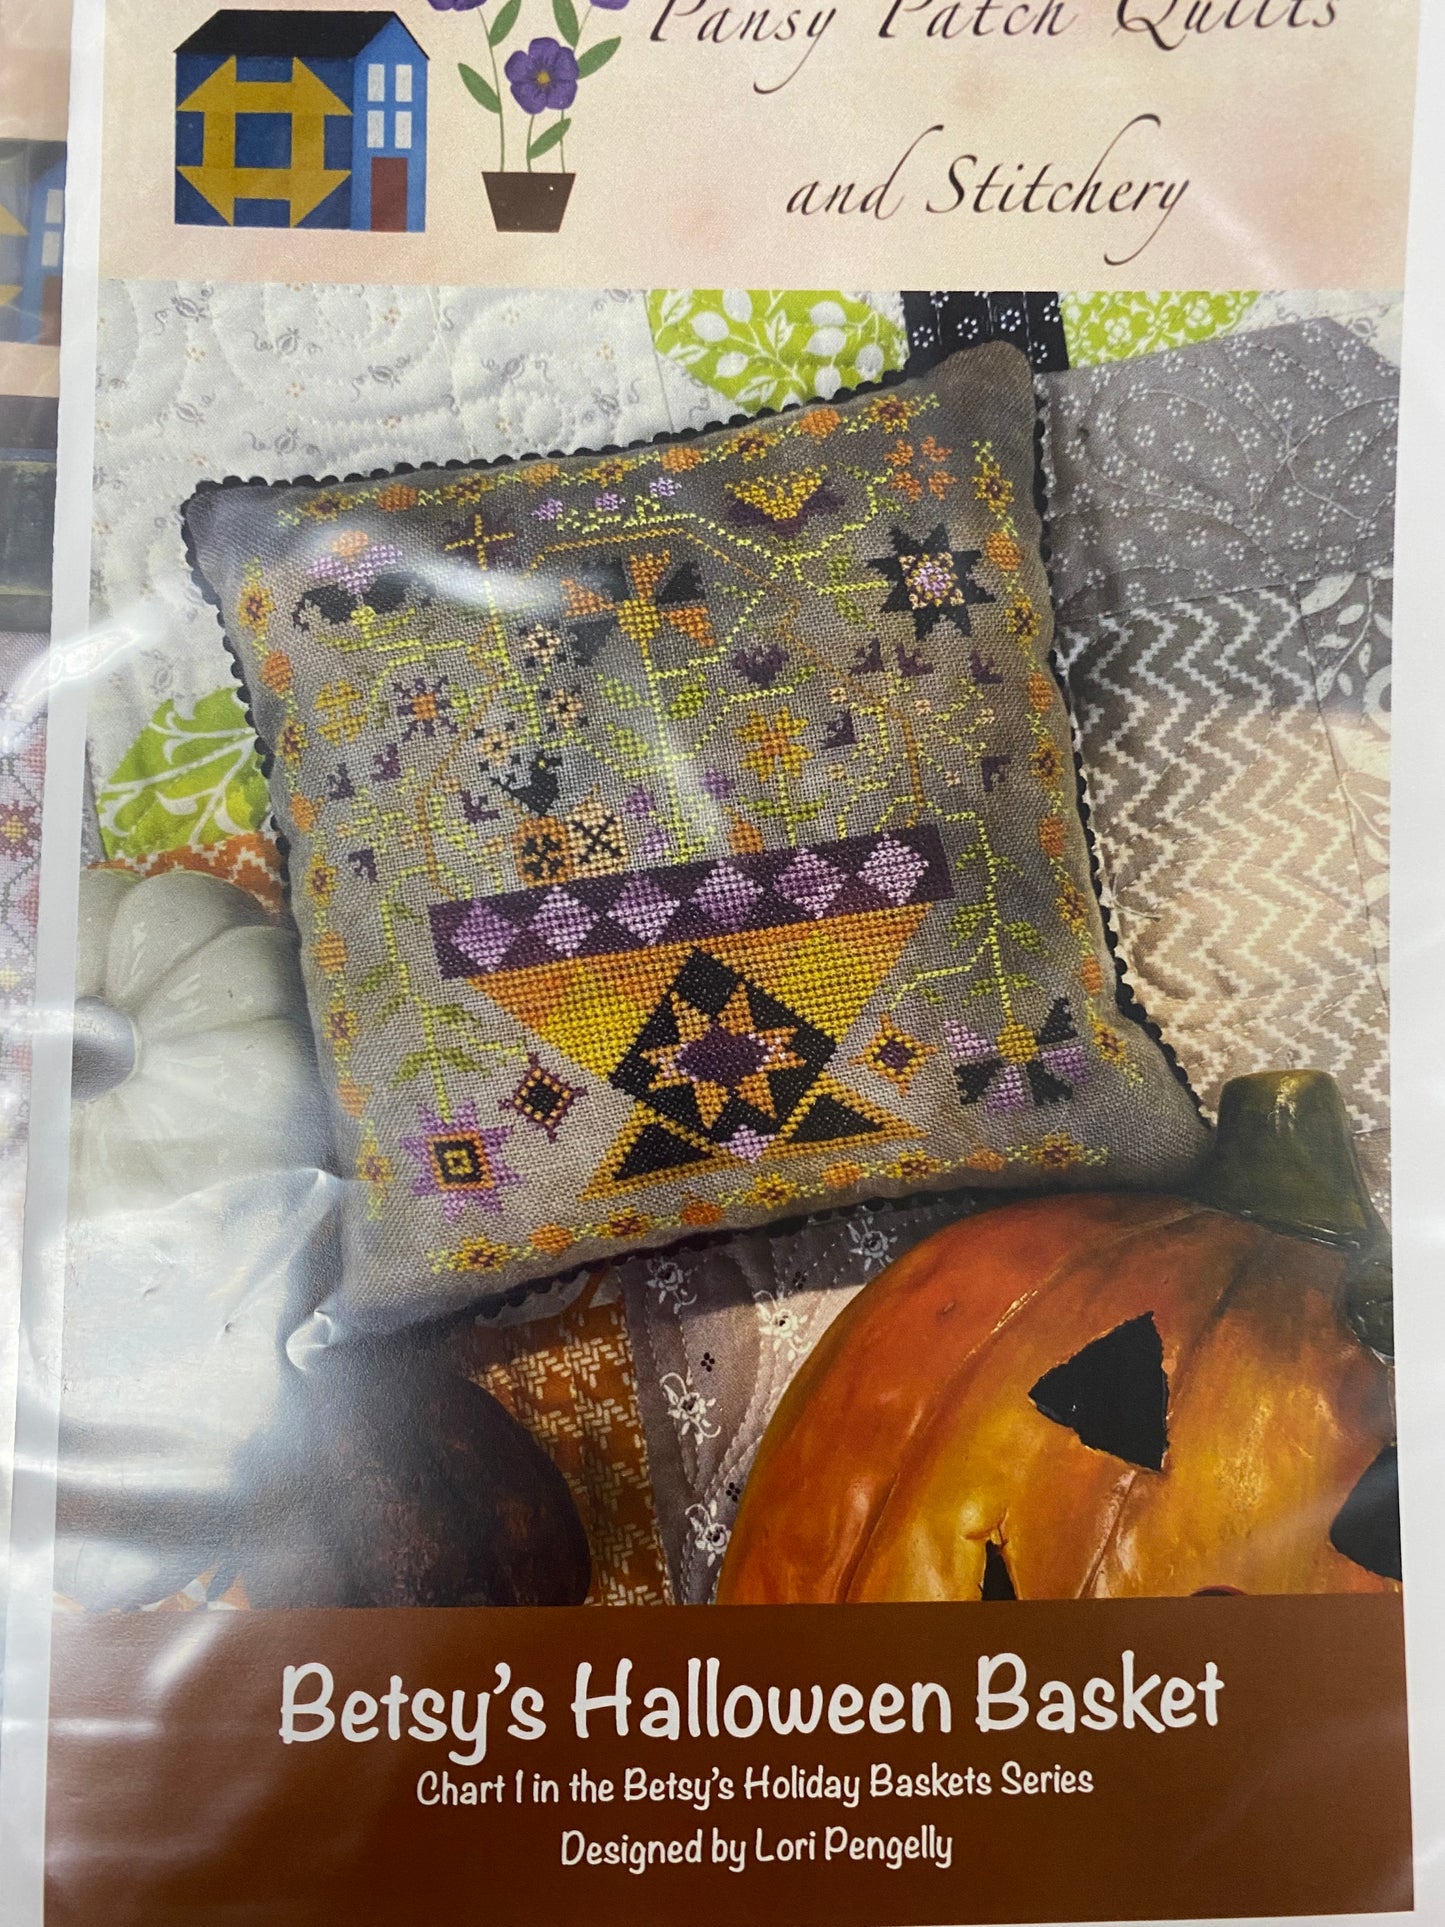 Betsy's Halloween Basket by Pansy Patch Quilts